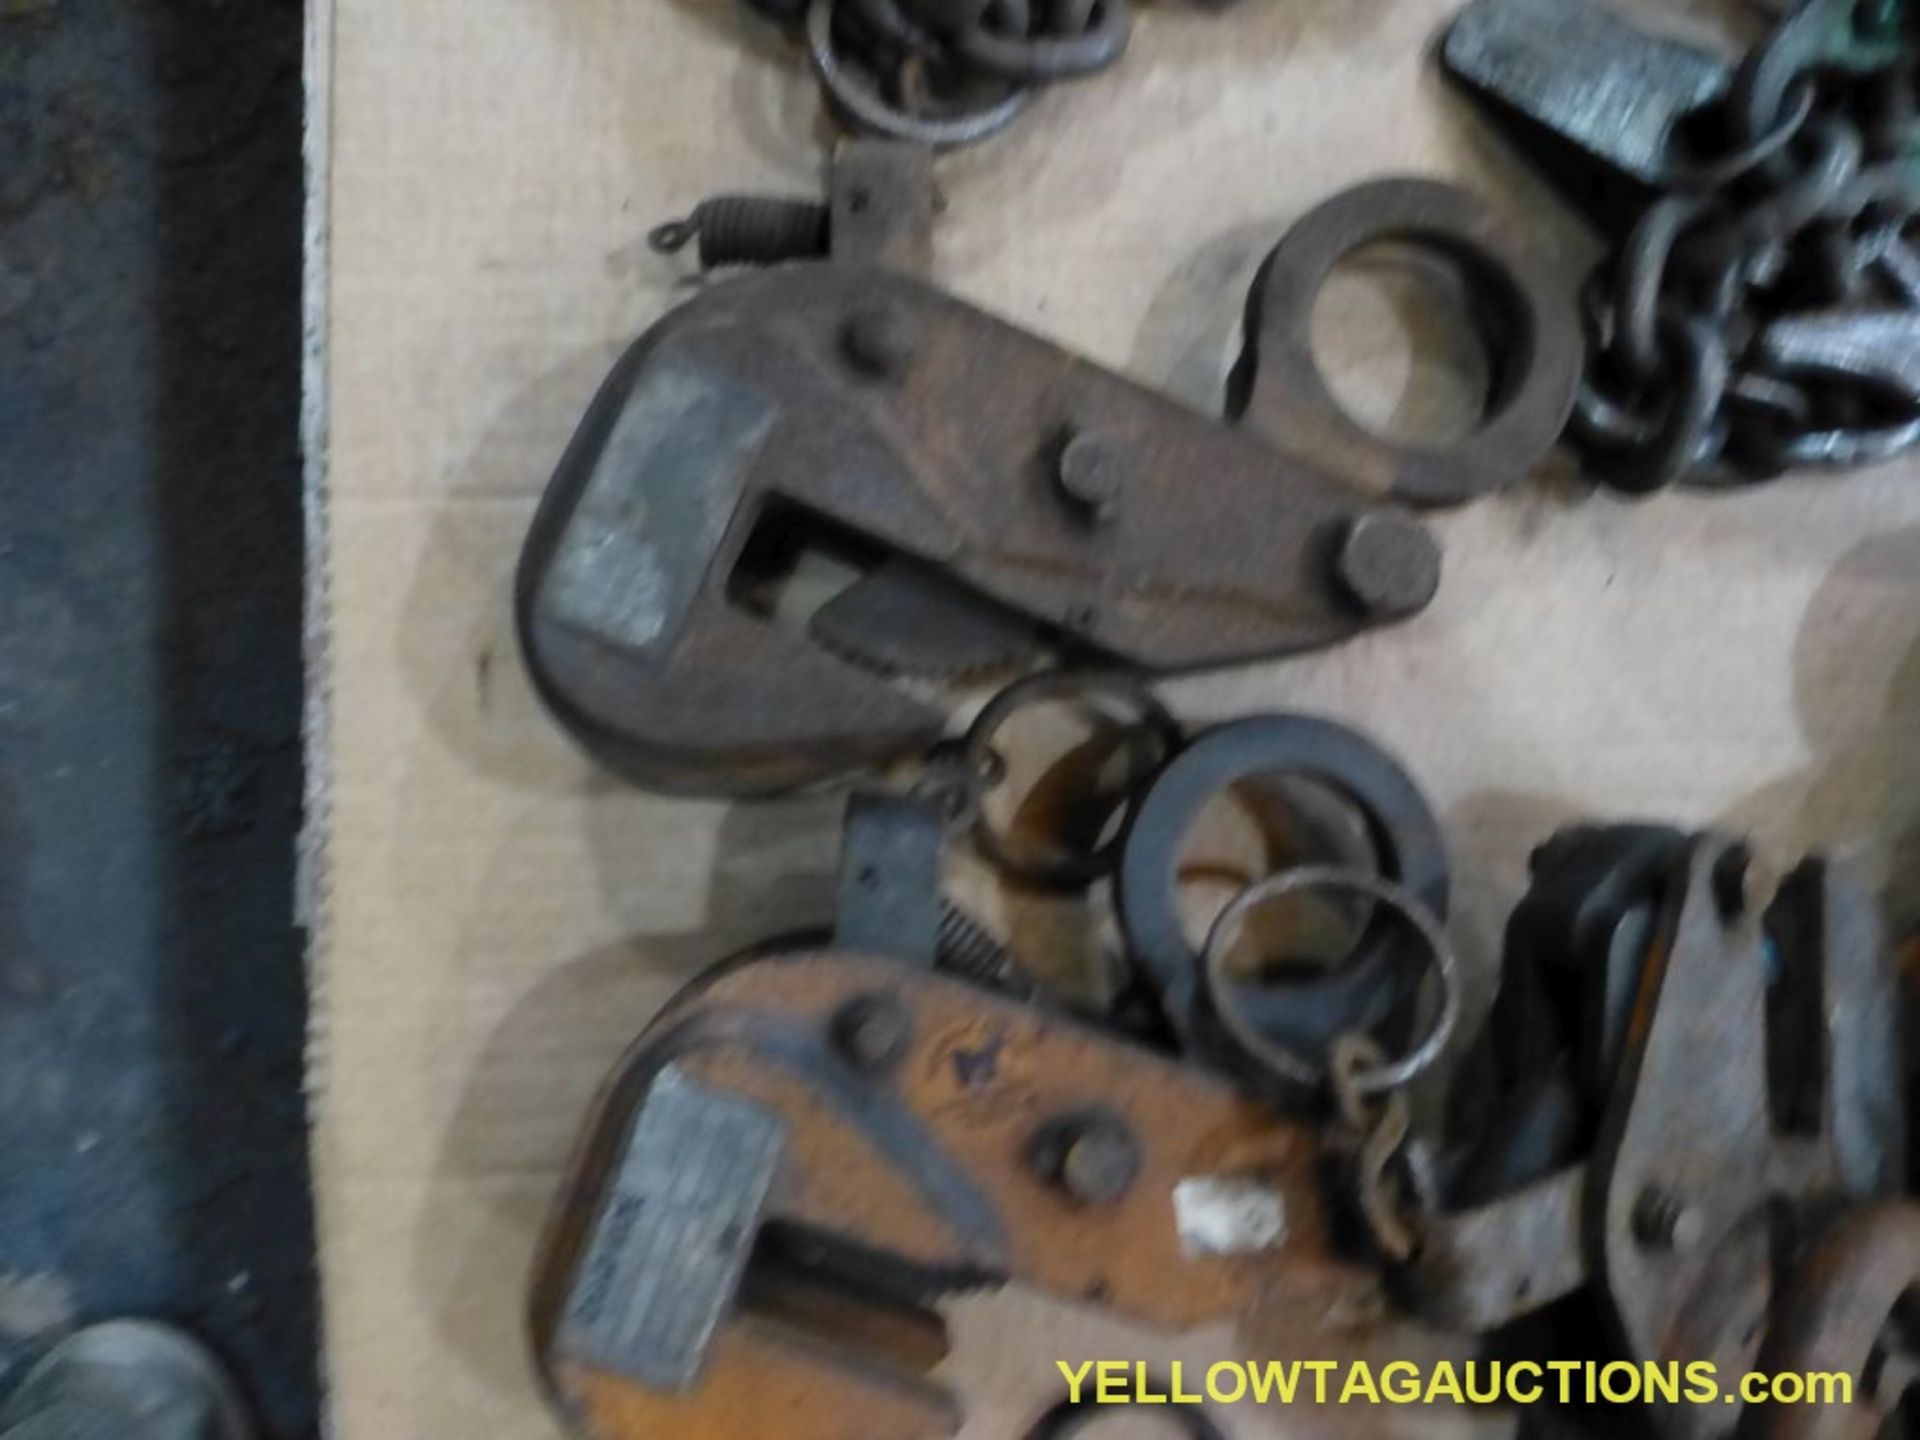 Lot of Assorted Lifting Clamps and Chain Slings - Image 4 of 6